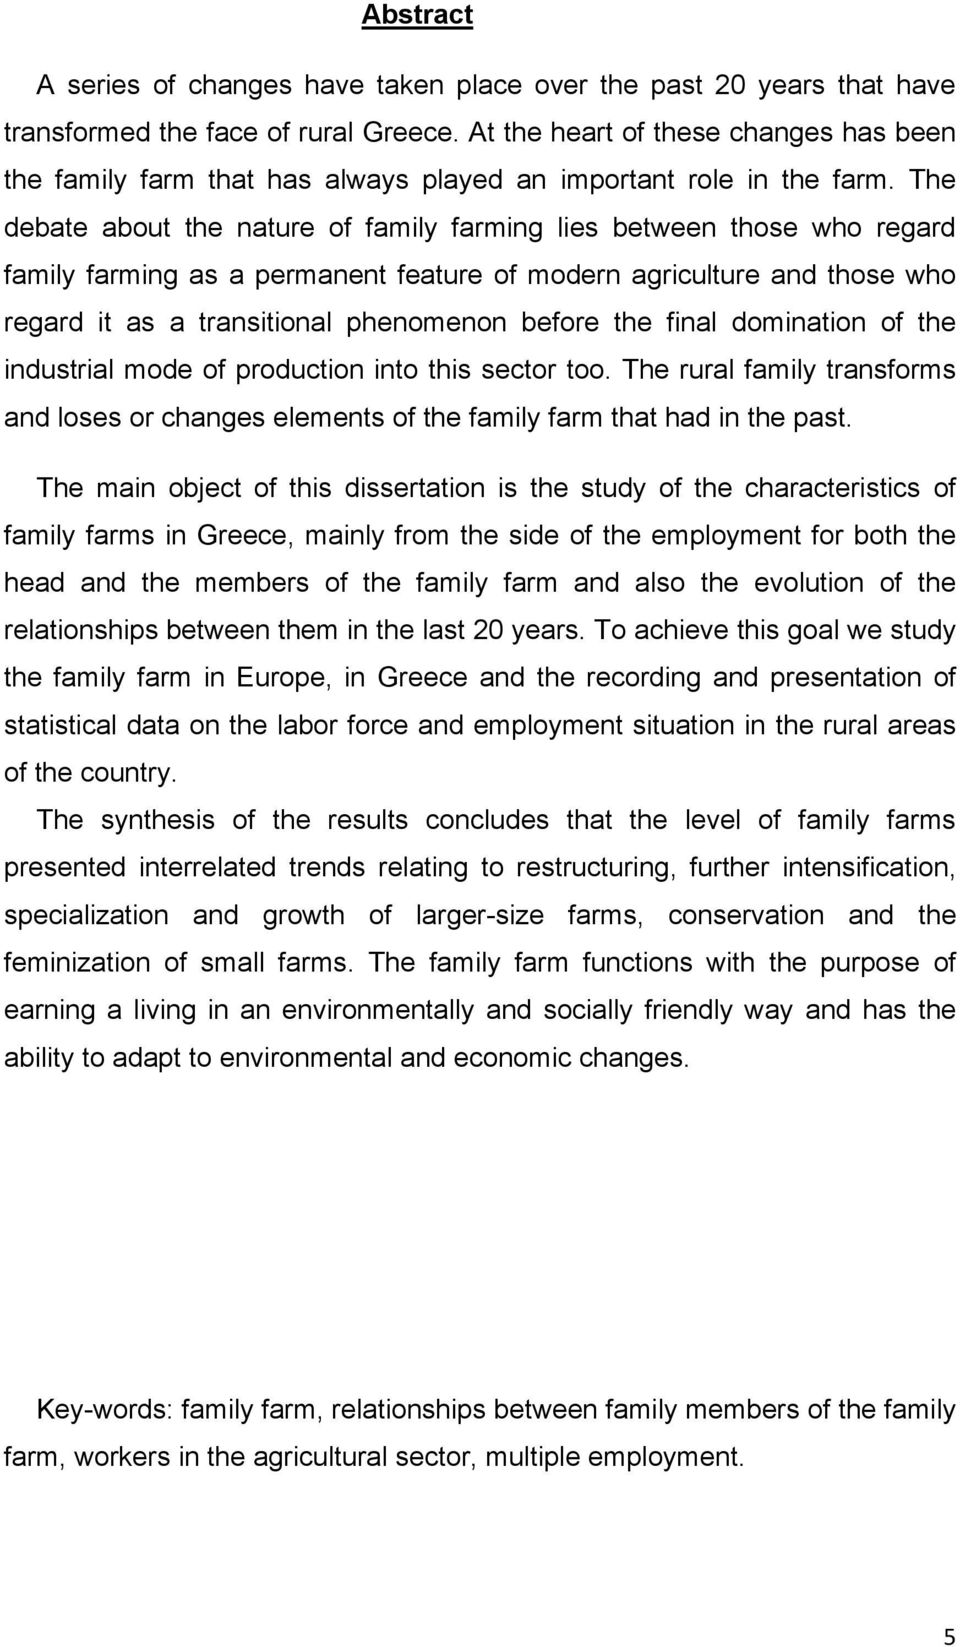 The debate about the nature of family farming lies between those who regard family farming as a permanent feature of modern agriculture and those who regard it as a transitional phenomenon before the